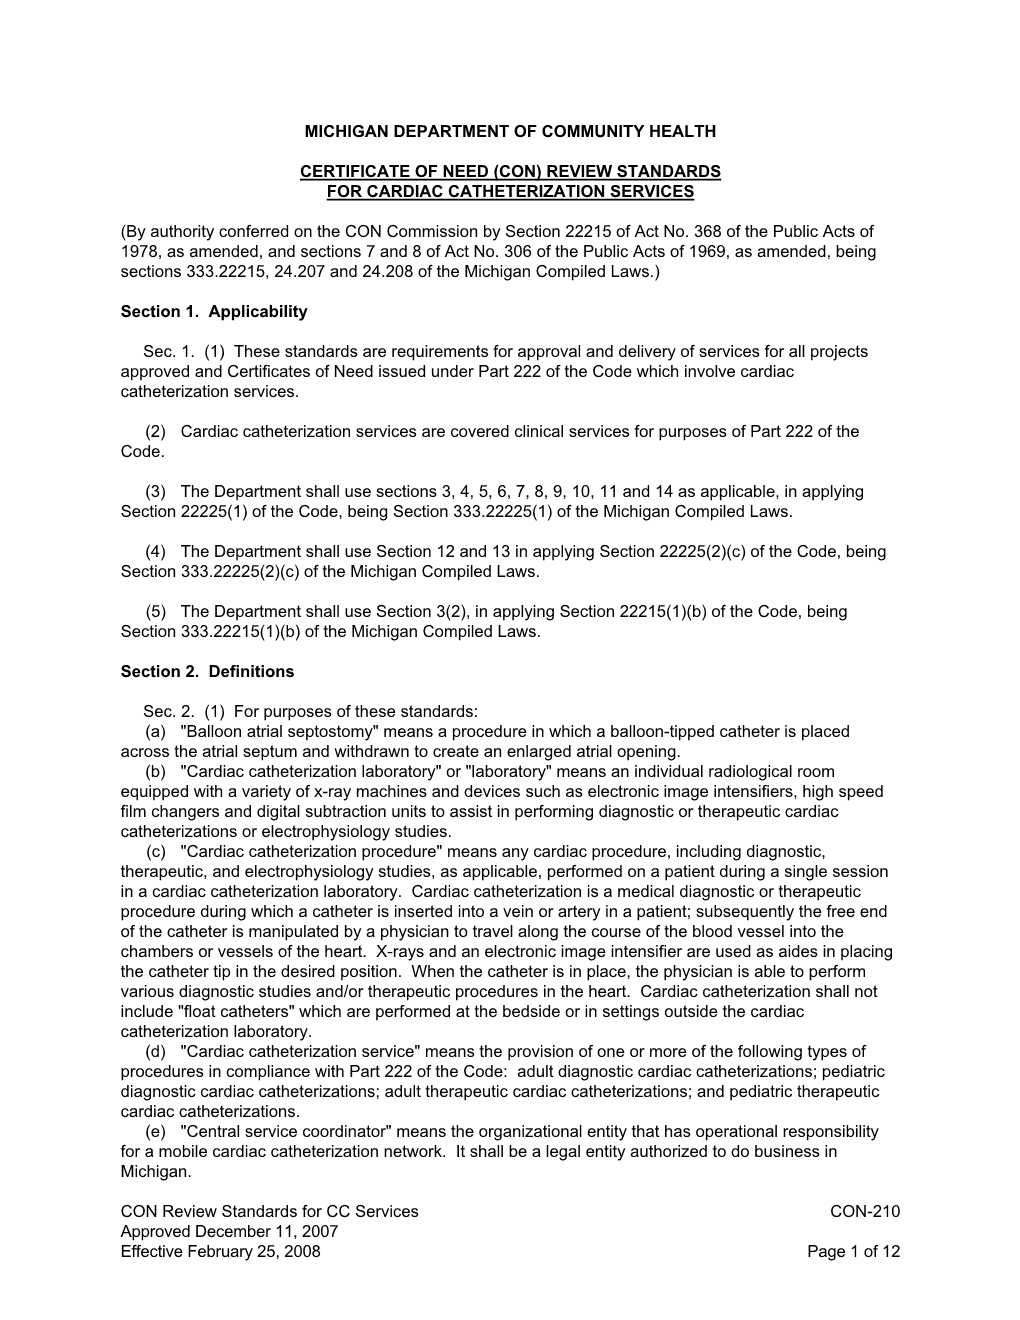 CON Review Standards for CC Services CON-210 Approved December 11, 2007 Effective February 25, 2008 Page 1 of 12 MICHIGAN DEPAR